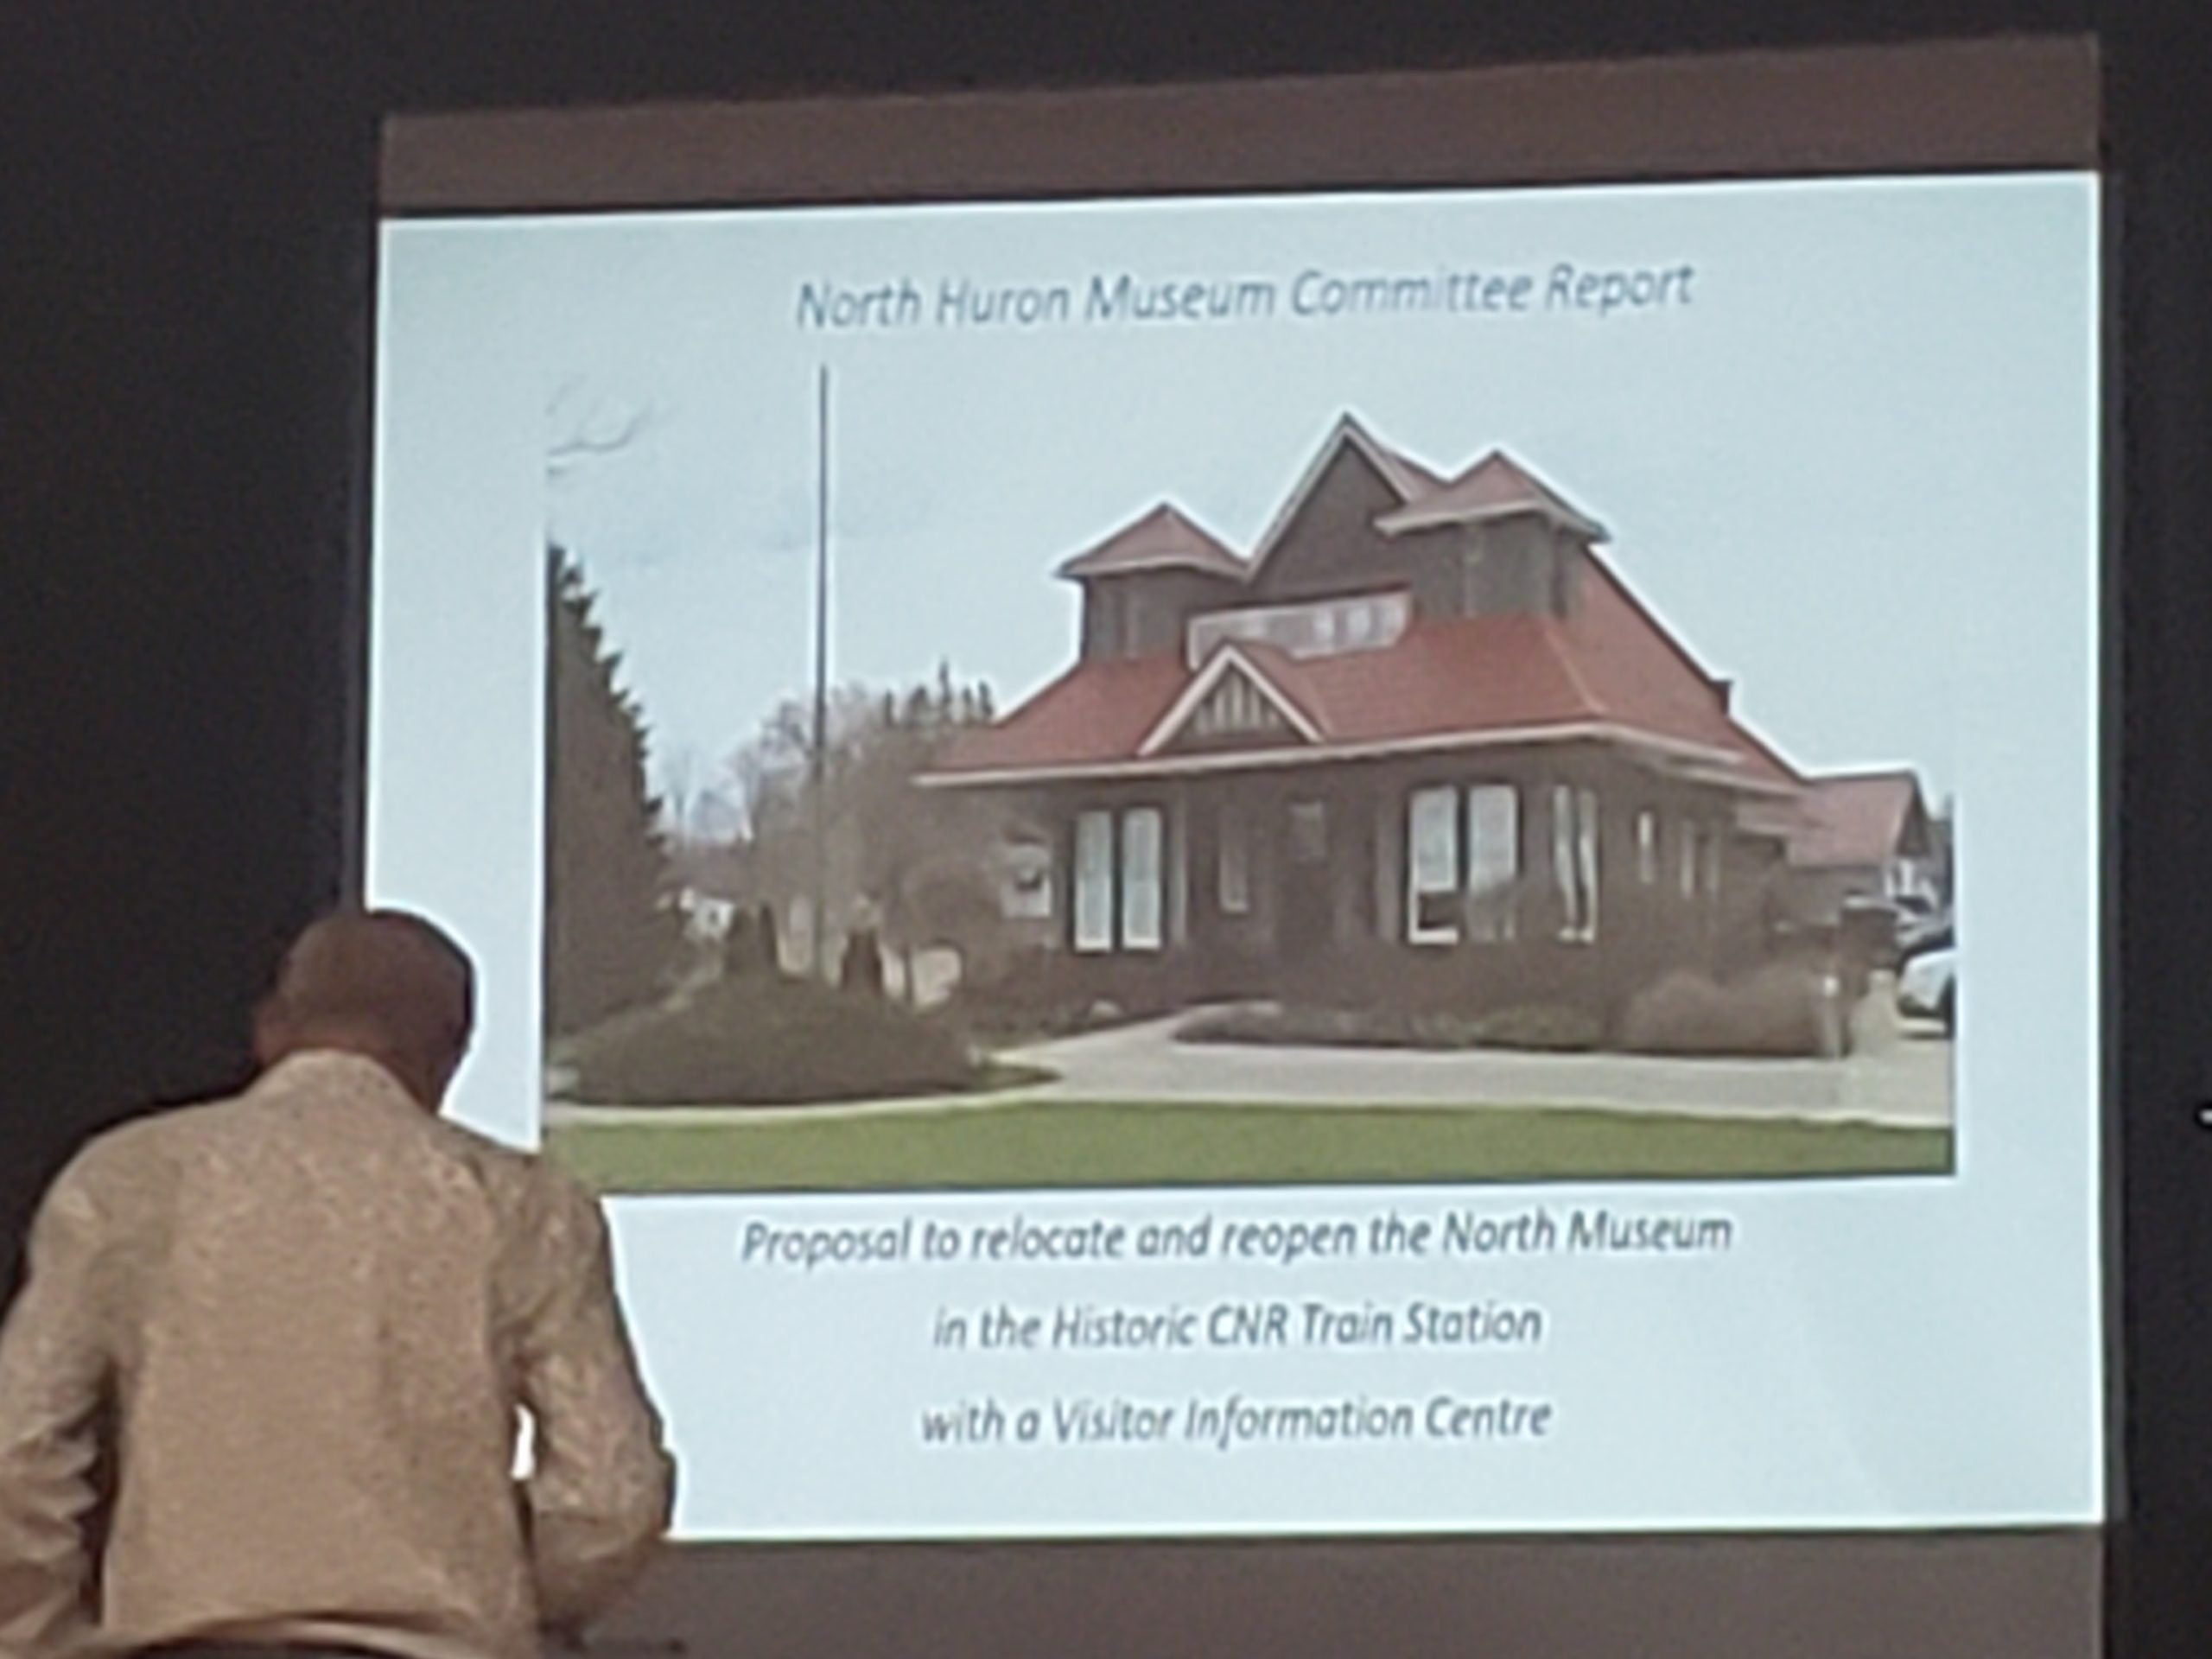 north huron ready to select members of the fundraising committee for the north huron museum relocation scaled